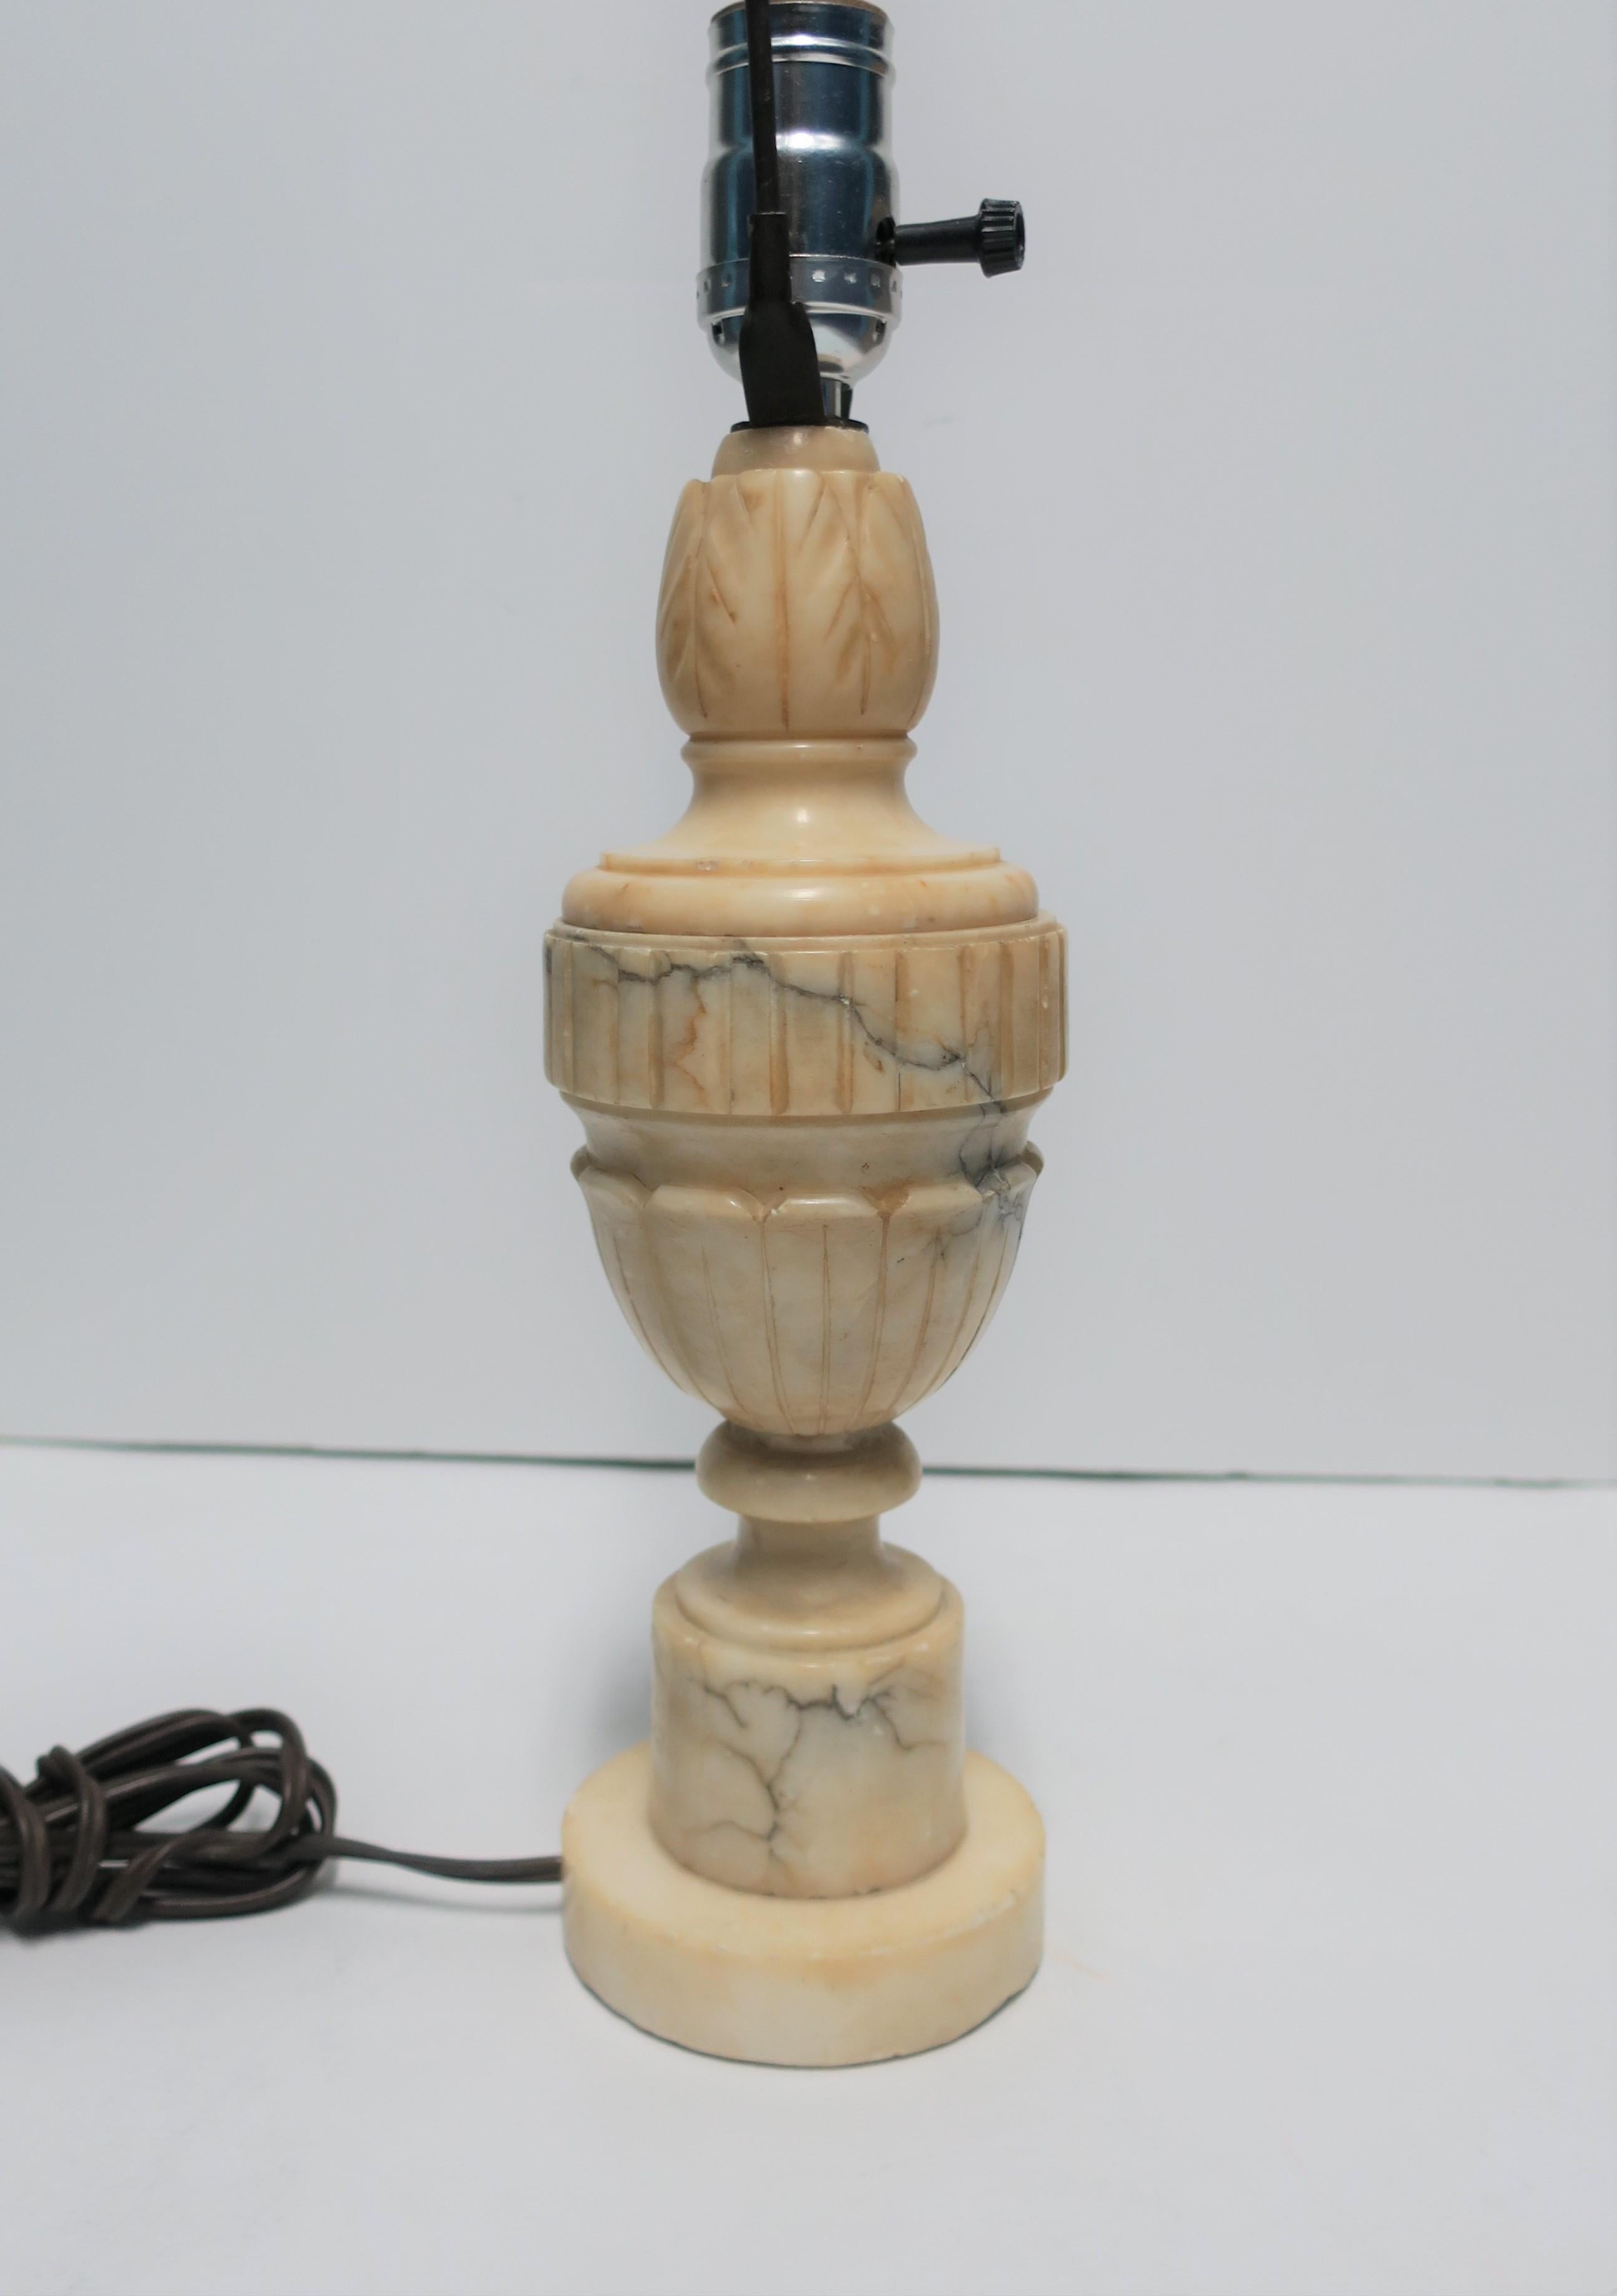 Italian Neoclassical Alabaster Marble Table or Desk Lamp, circa 1940s (Mitte des 20. Jahrhunderts)